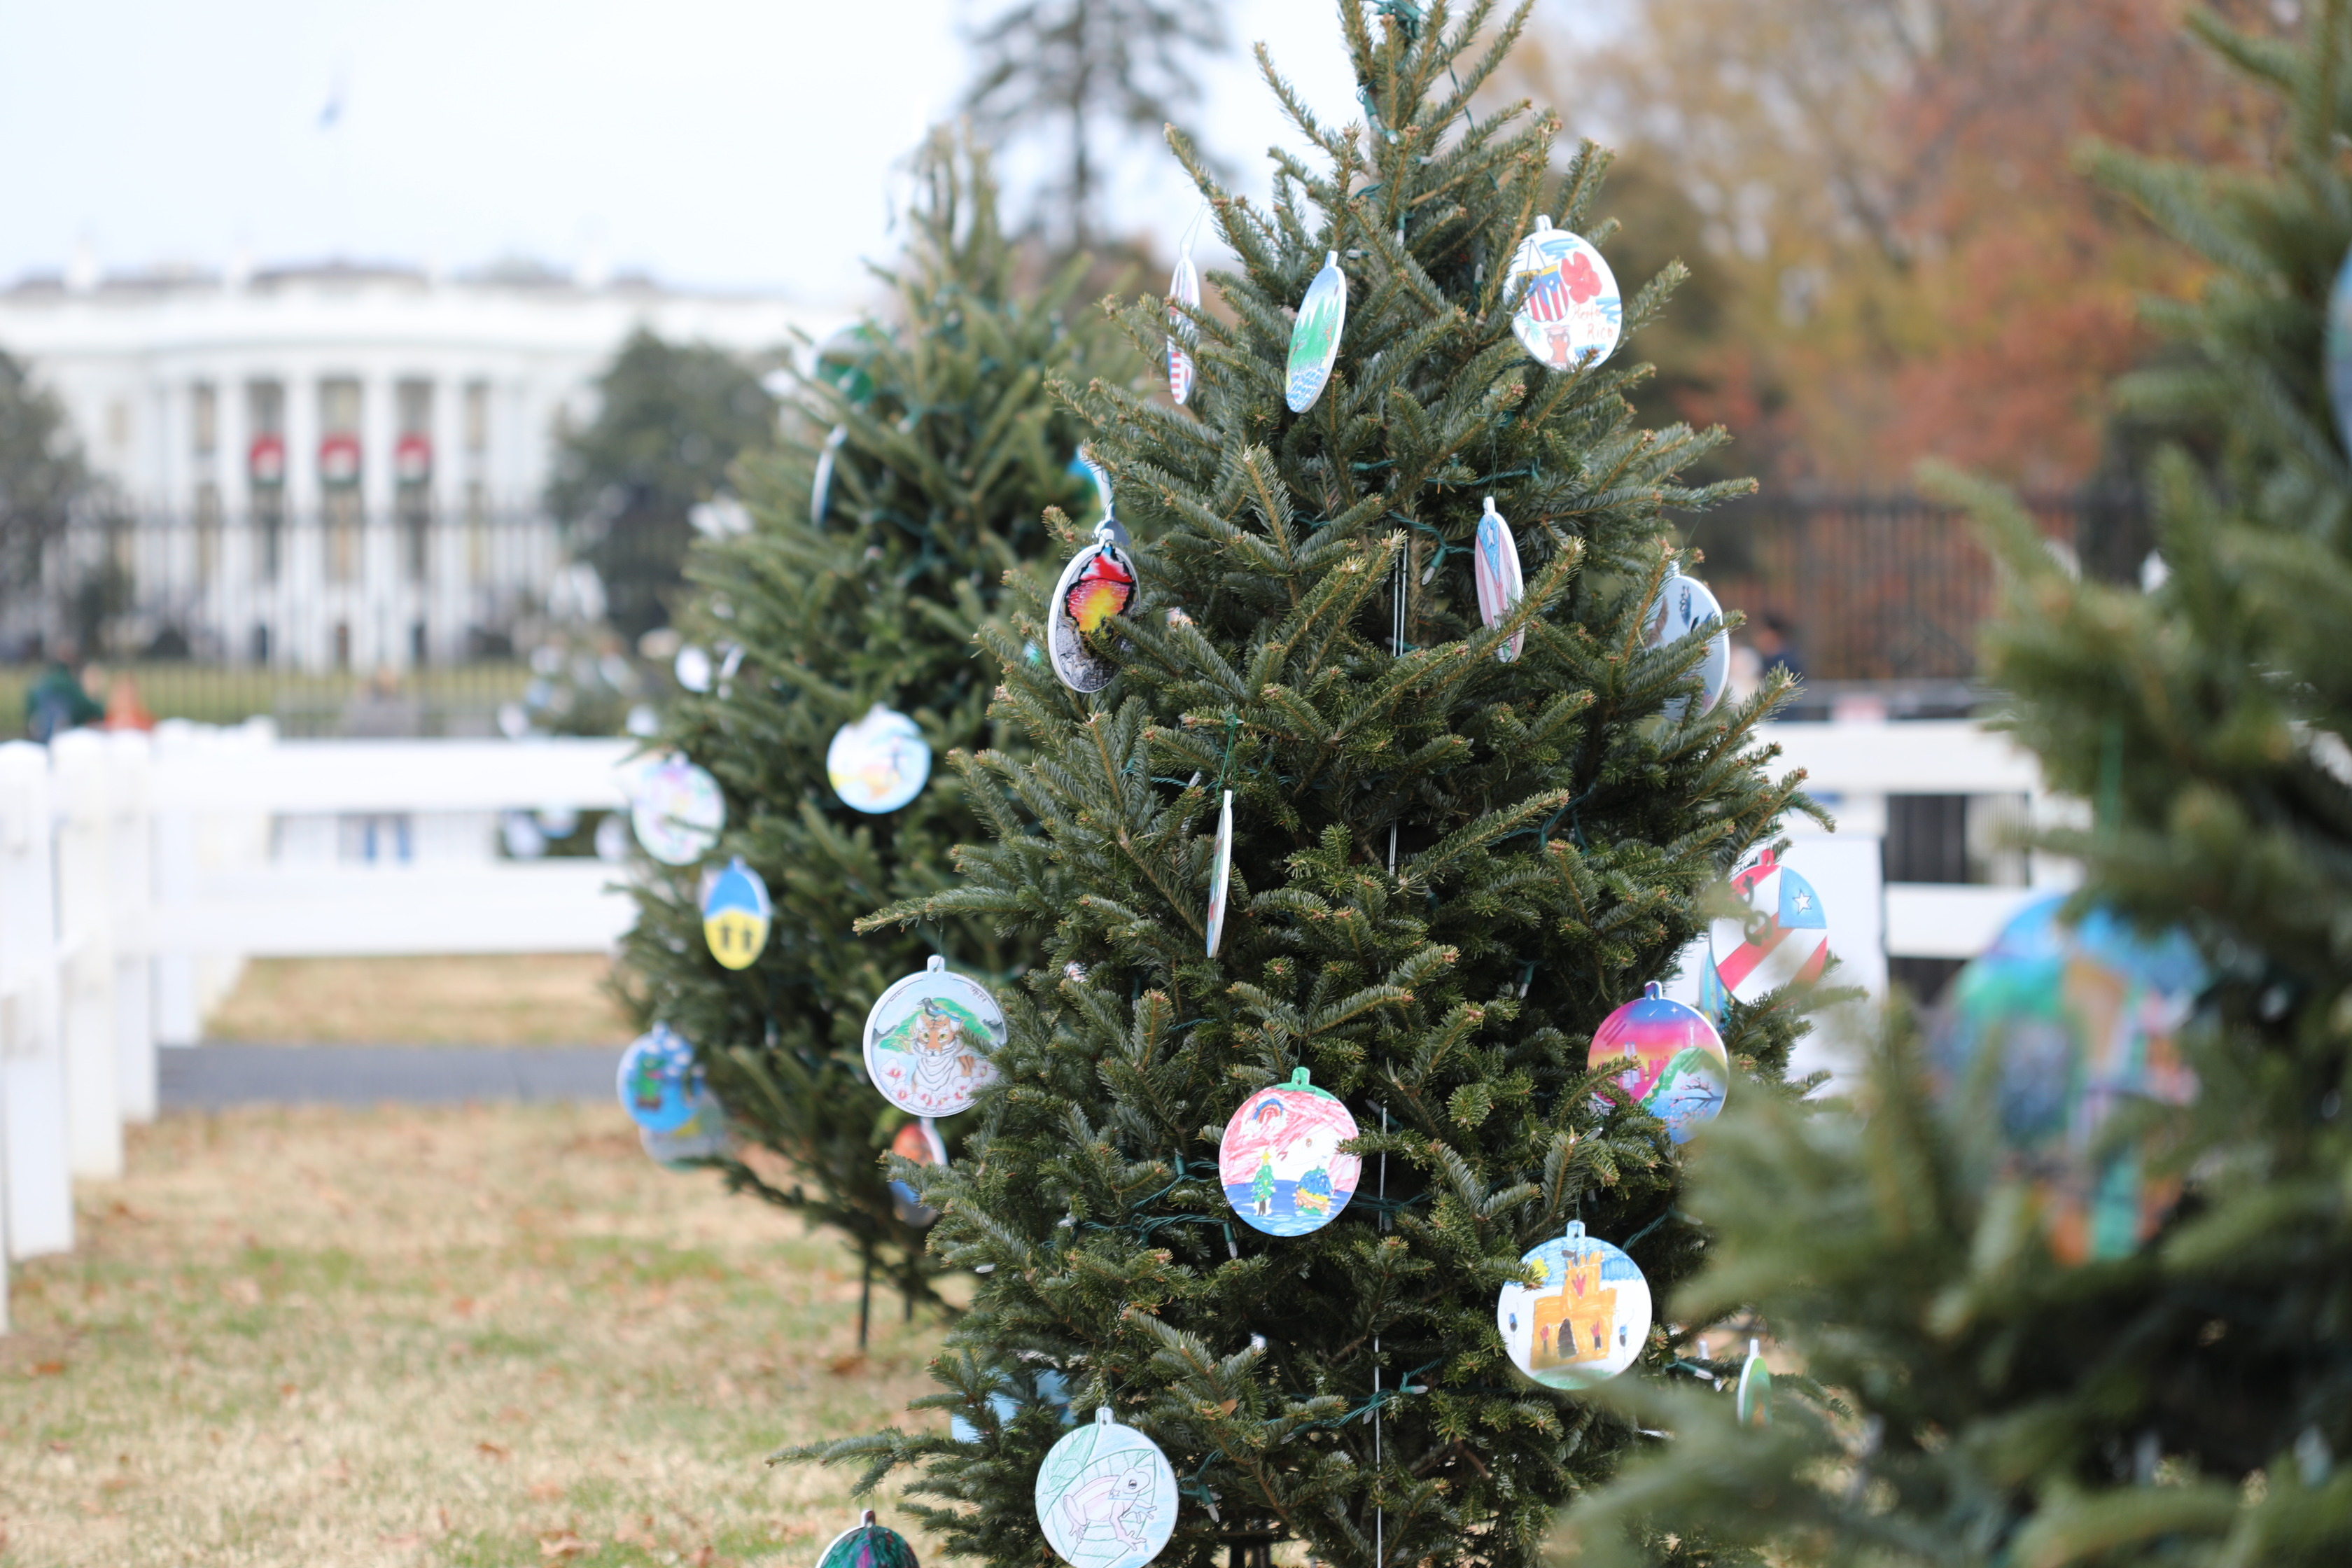 State trees decorated with handmade ornaments from the 2021 America Celebrates ornament program.